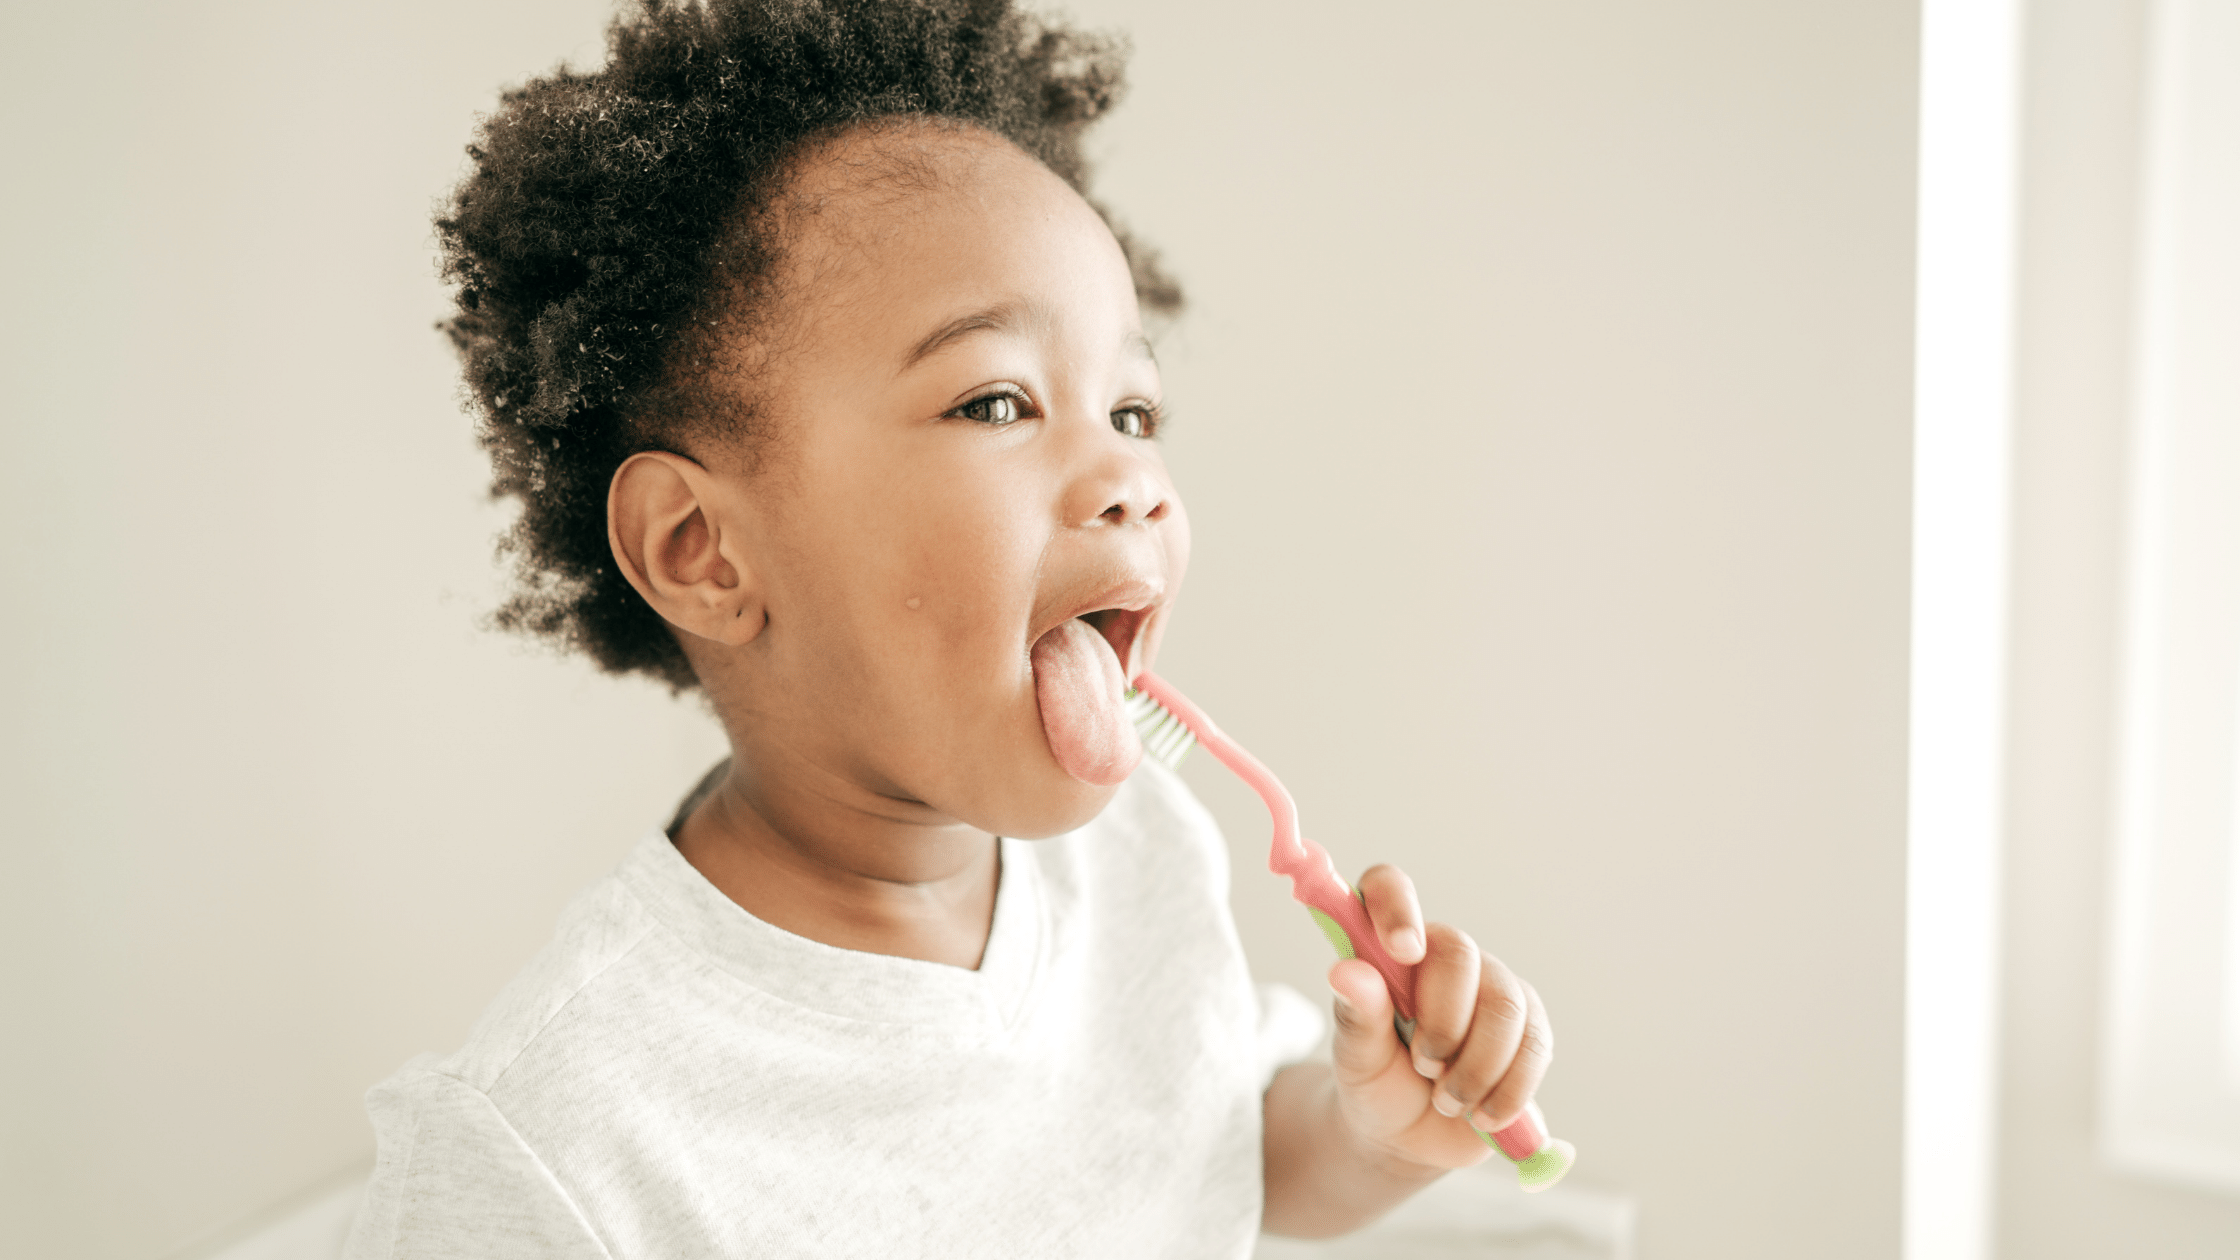 Simple Hygiene for Toddlers - Top Tips